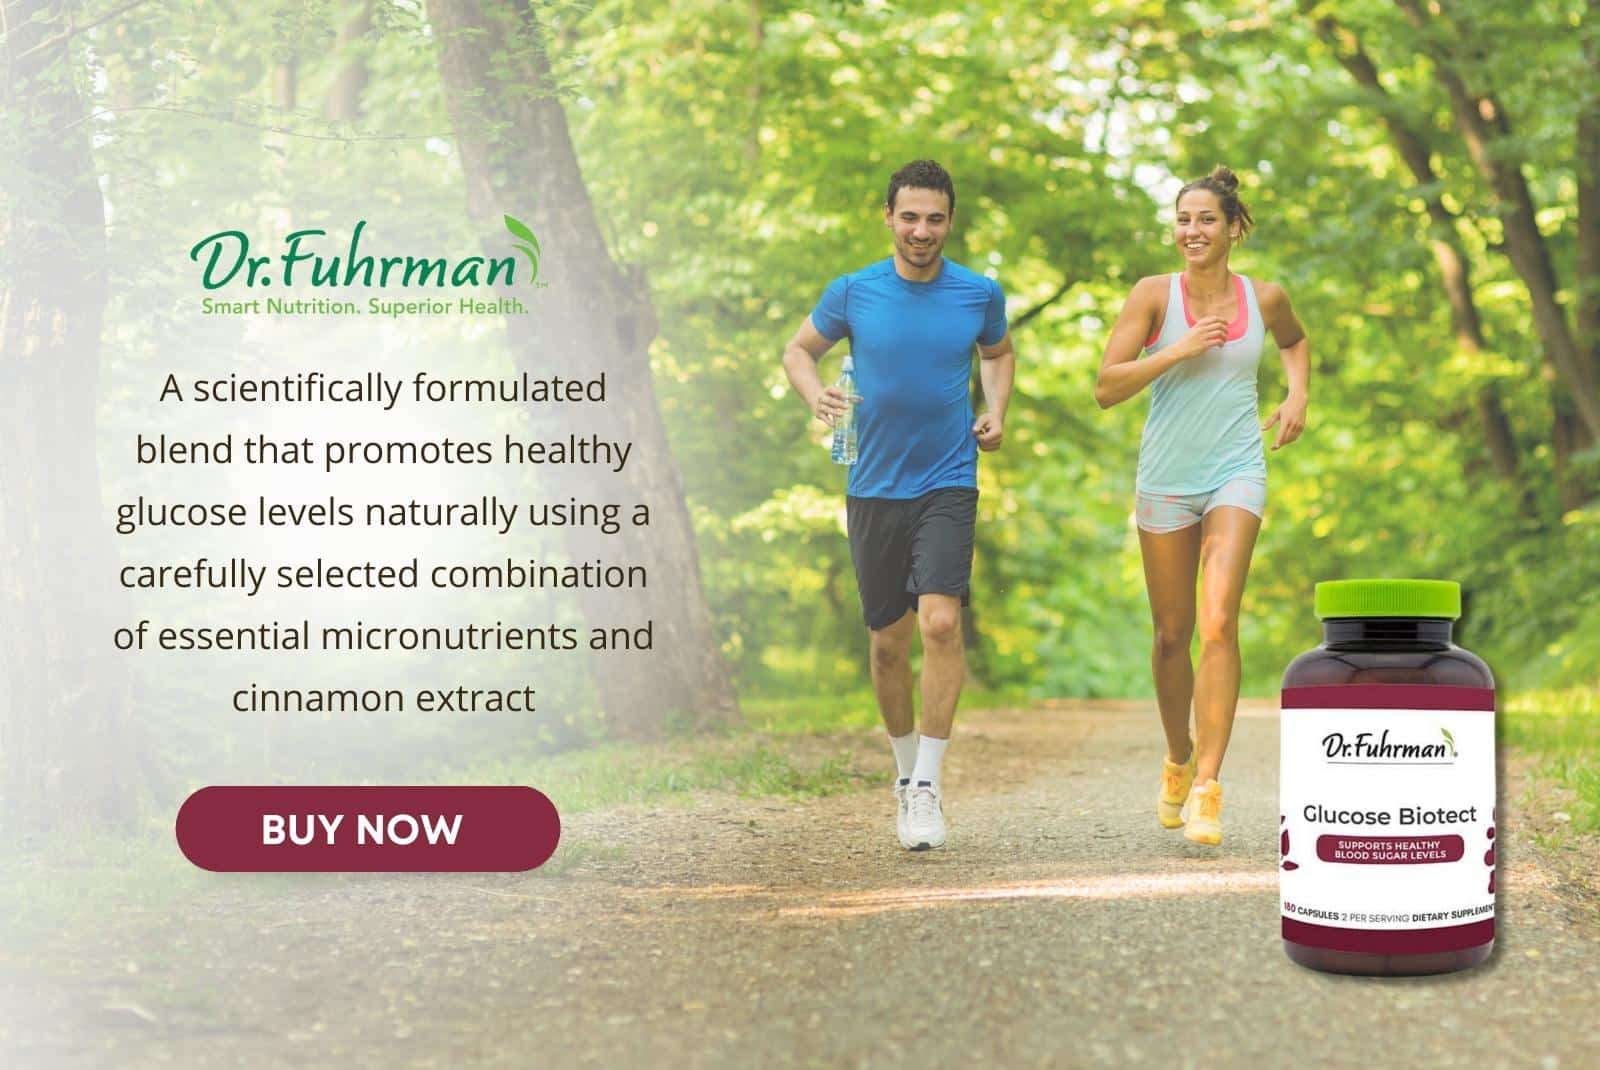 Click here to get Dr. Fuhrman's Glucose Biotect supplement